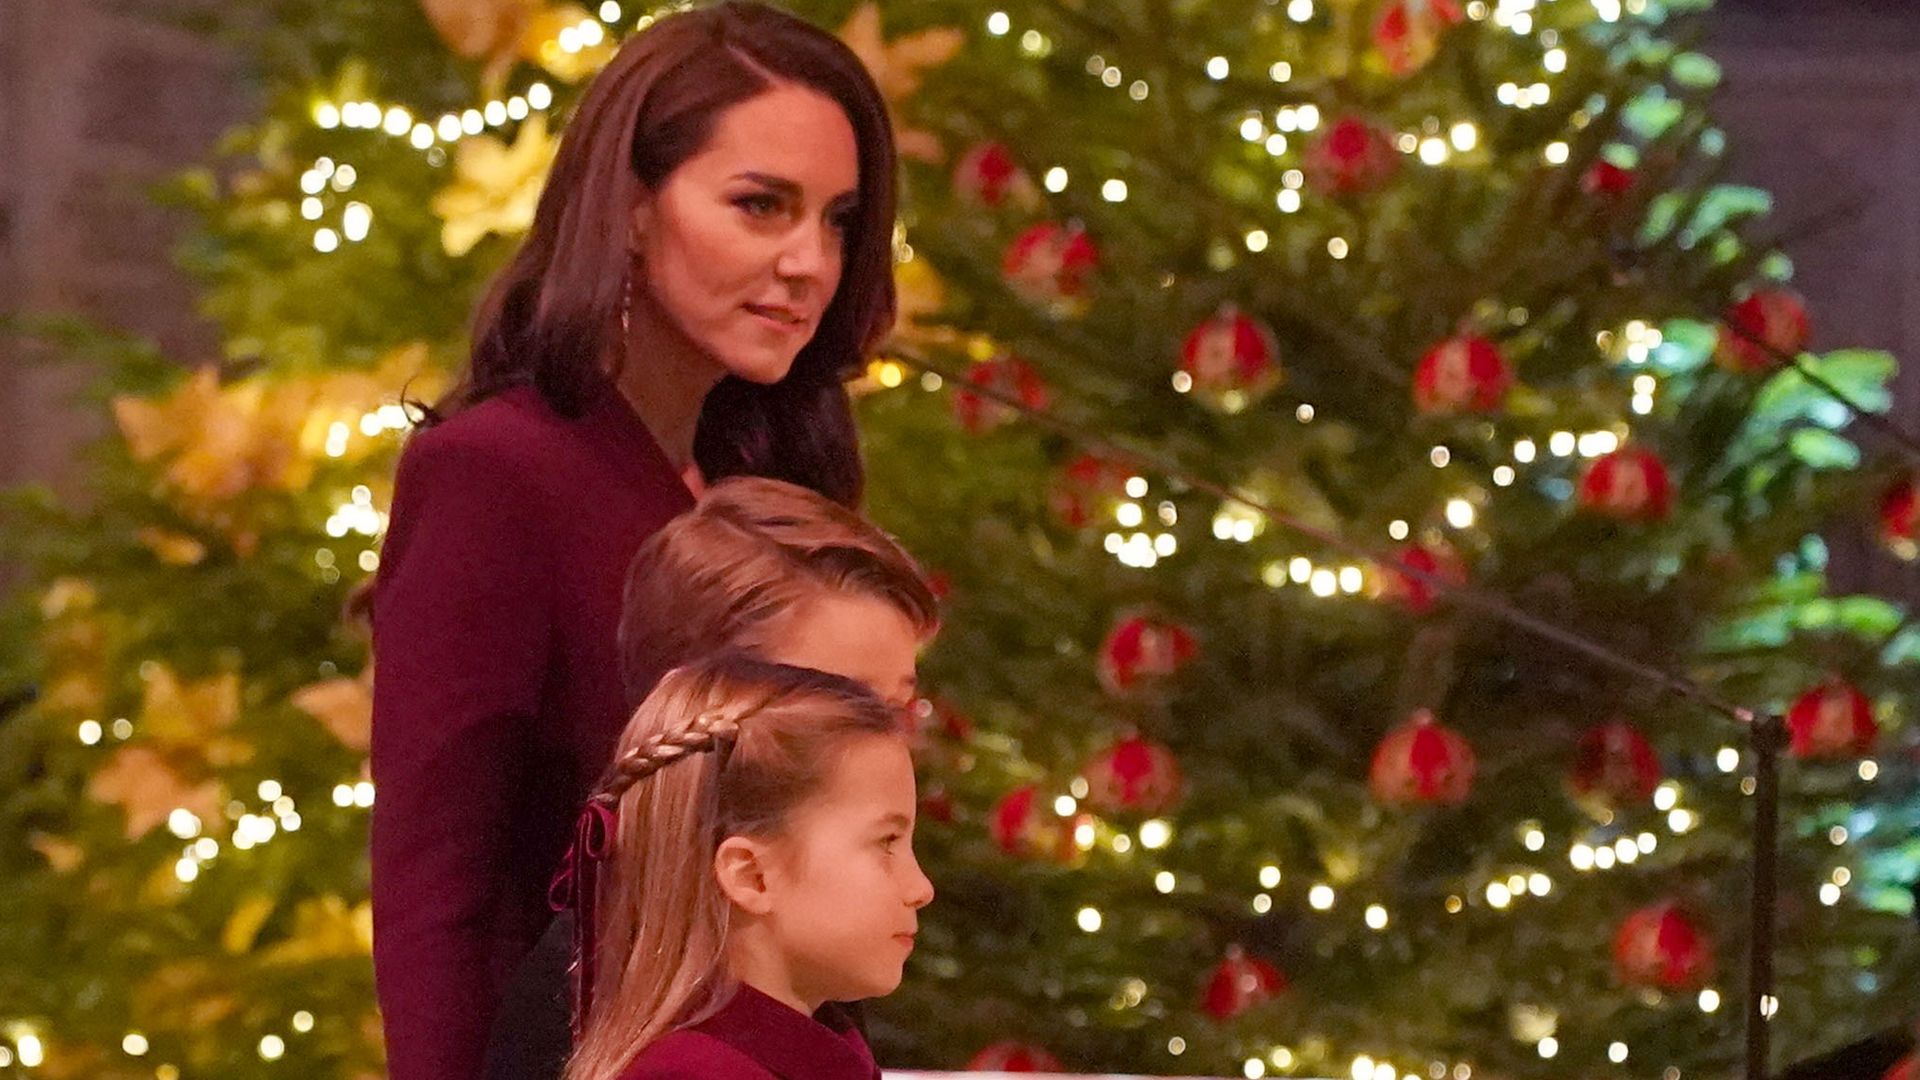 The young royals get to decorate their own Christmas tree at Carole Middleton's home